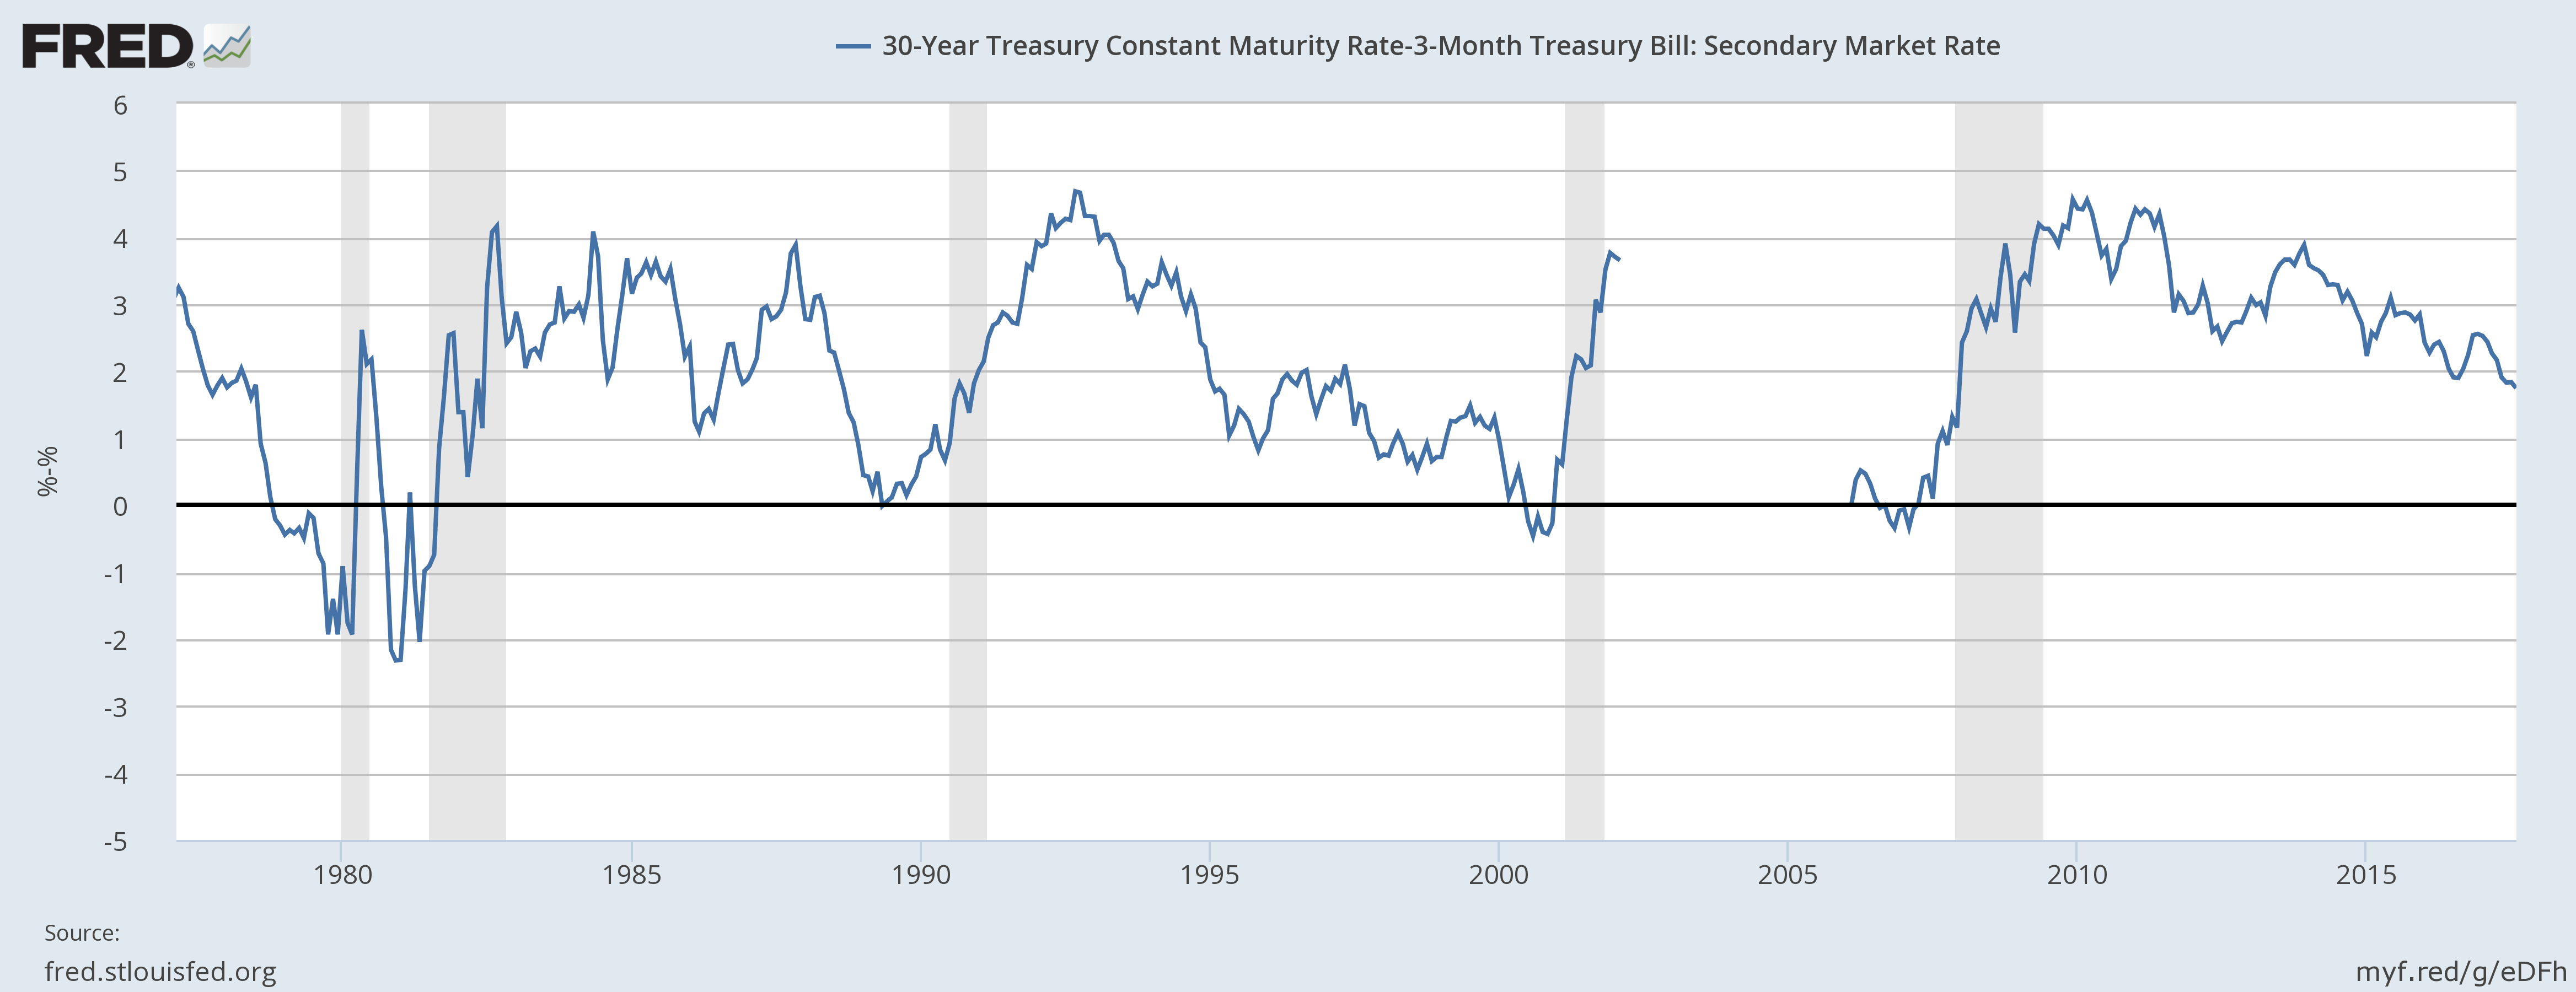 30-Year Treasury Constant Maturity Rate 3-Month Treaury Bill